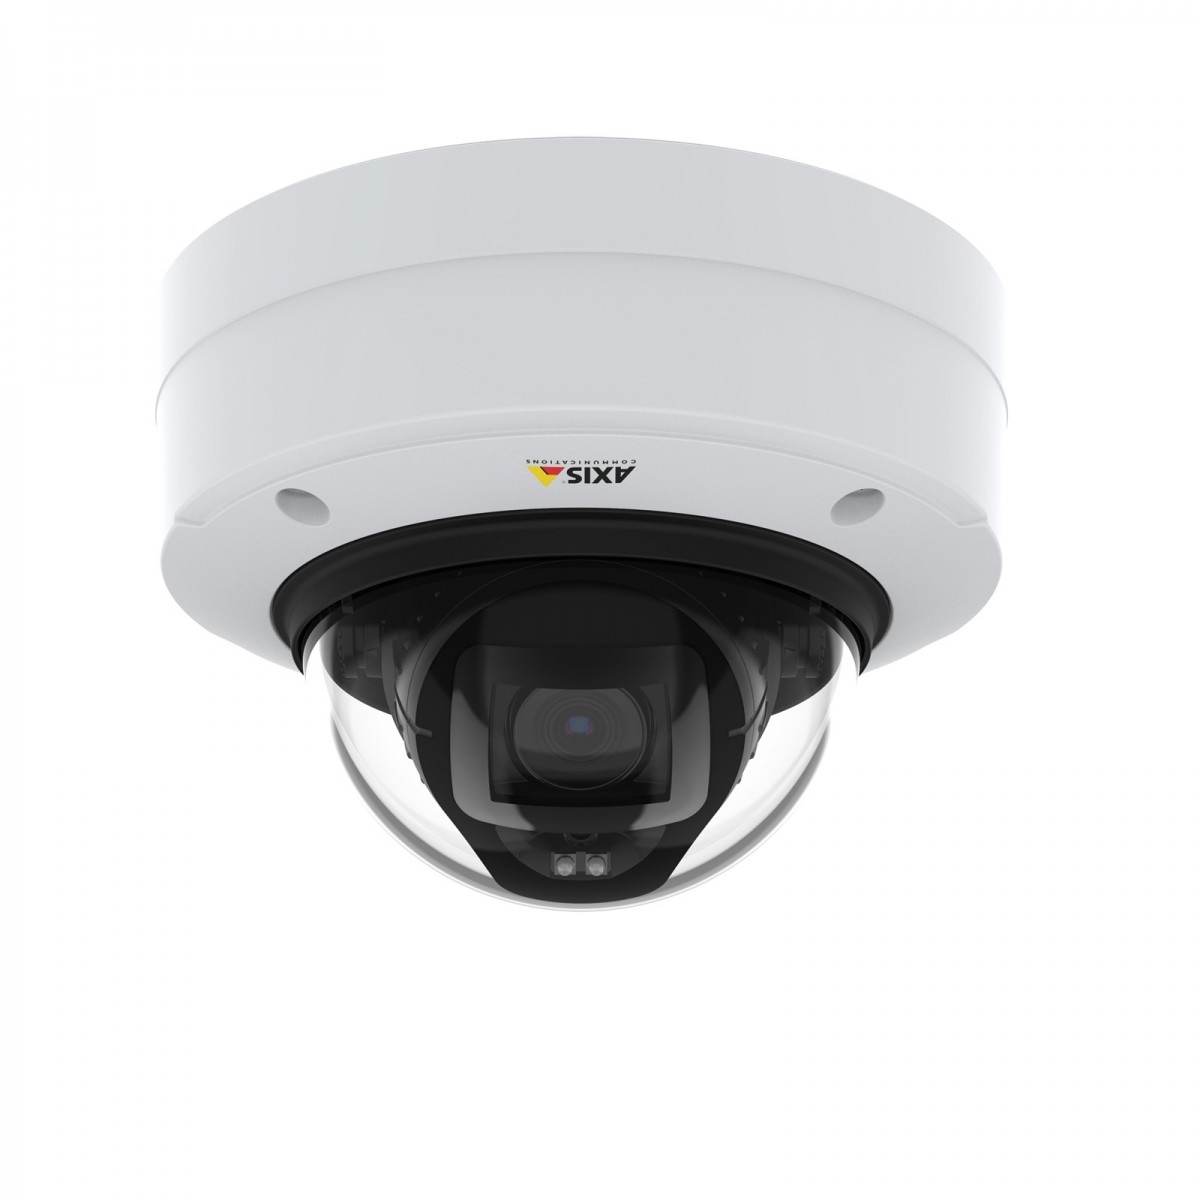 Axis P3248-LVE - IP security camera - Outdoor - Wired - Dome - Ceiling/wall - Black - White